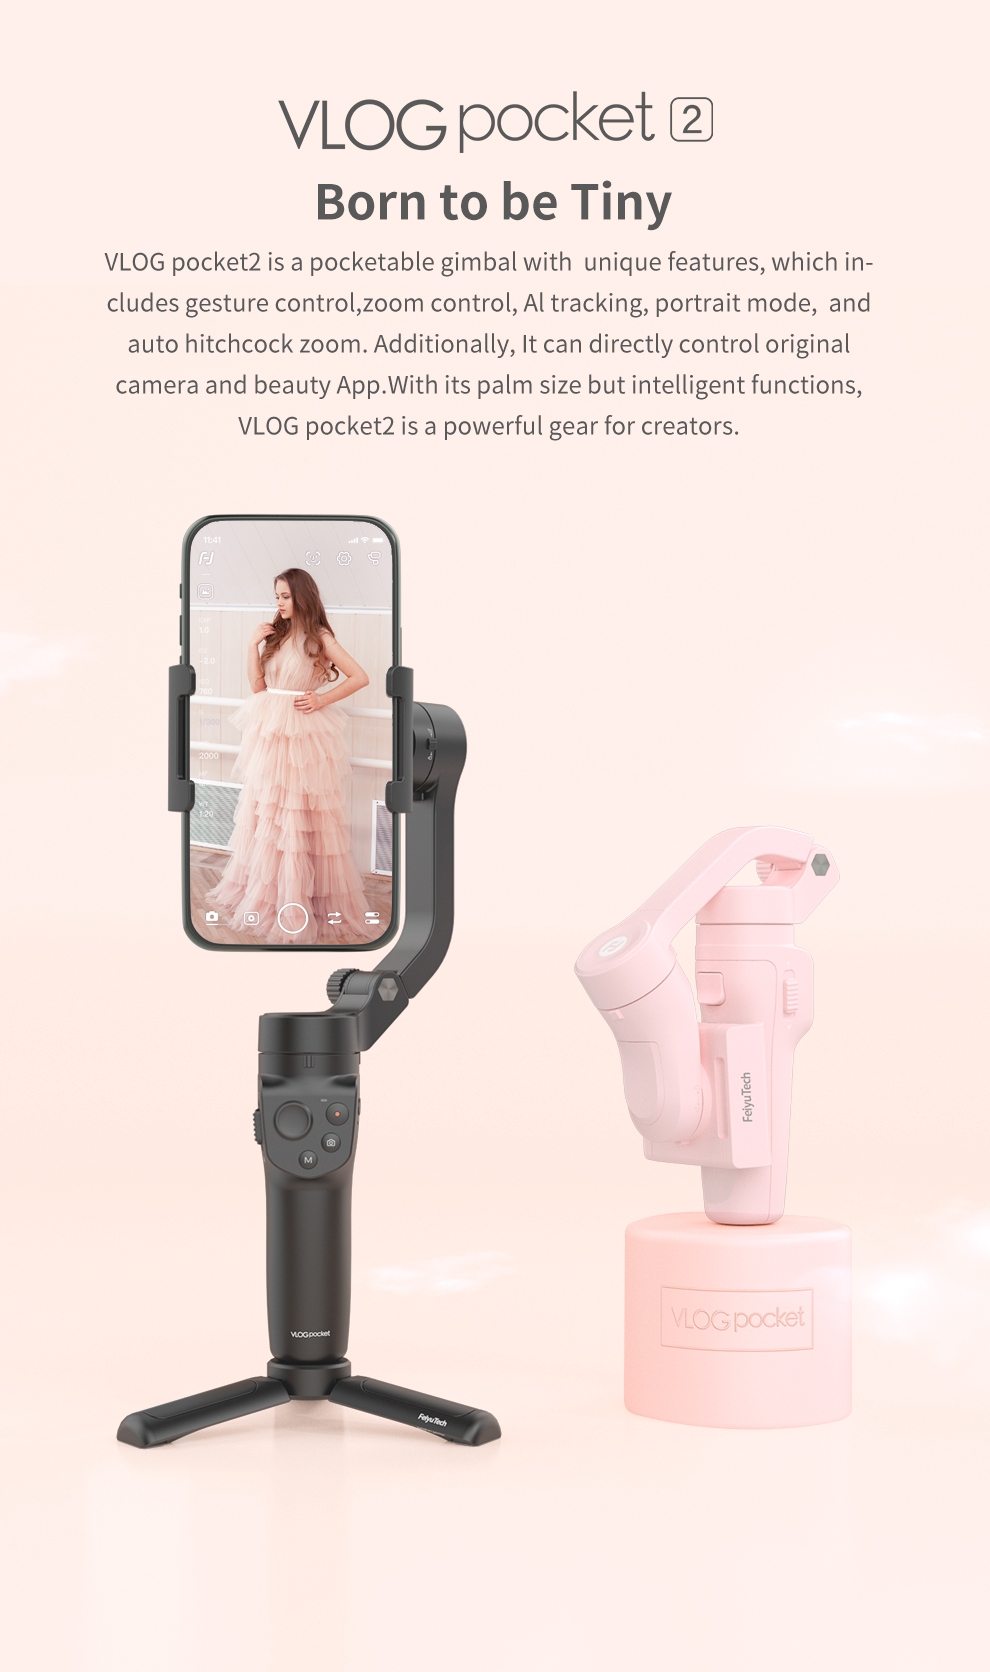 FeiyuTech New VLOG Pocket 2 3-Axis Joystick Zoom Original Camera App Control Foldable Smartphone Gimbal Stabilizer For 41mm-89mm Android/IOS Smartphone